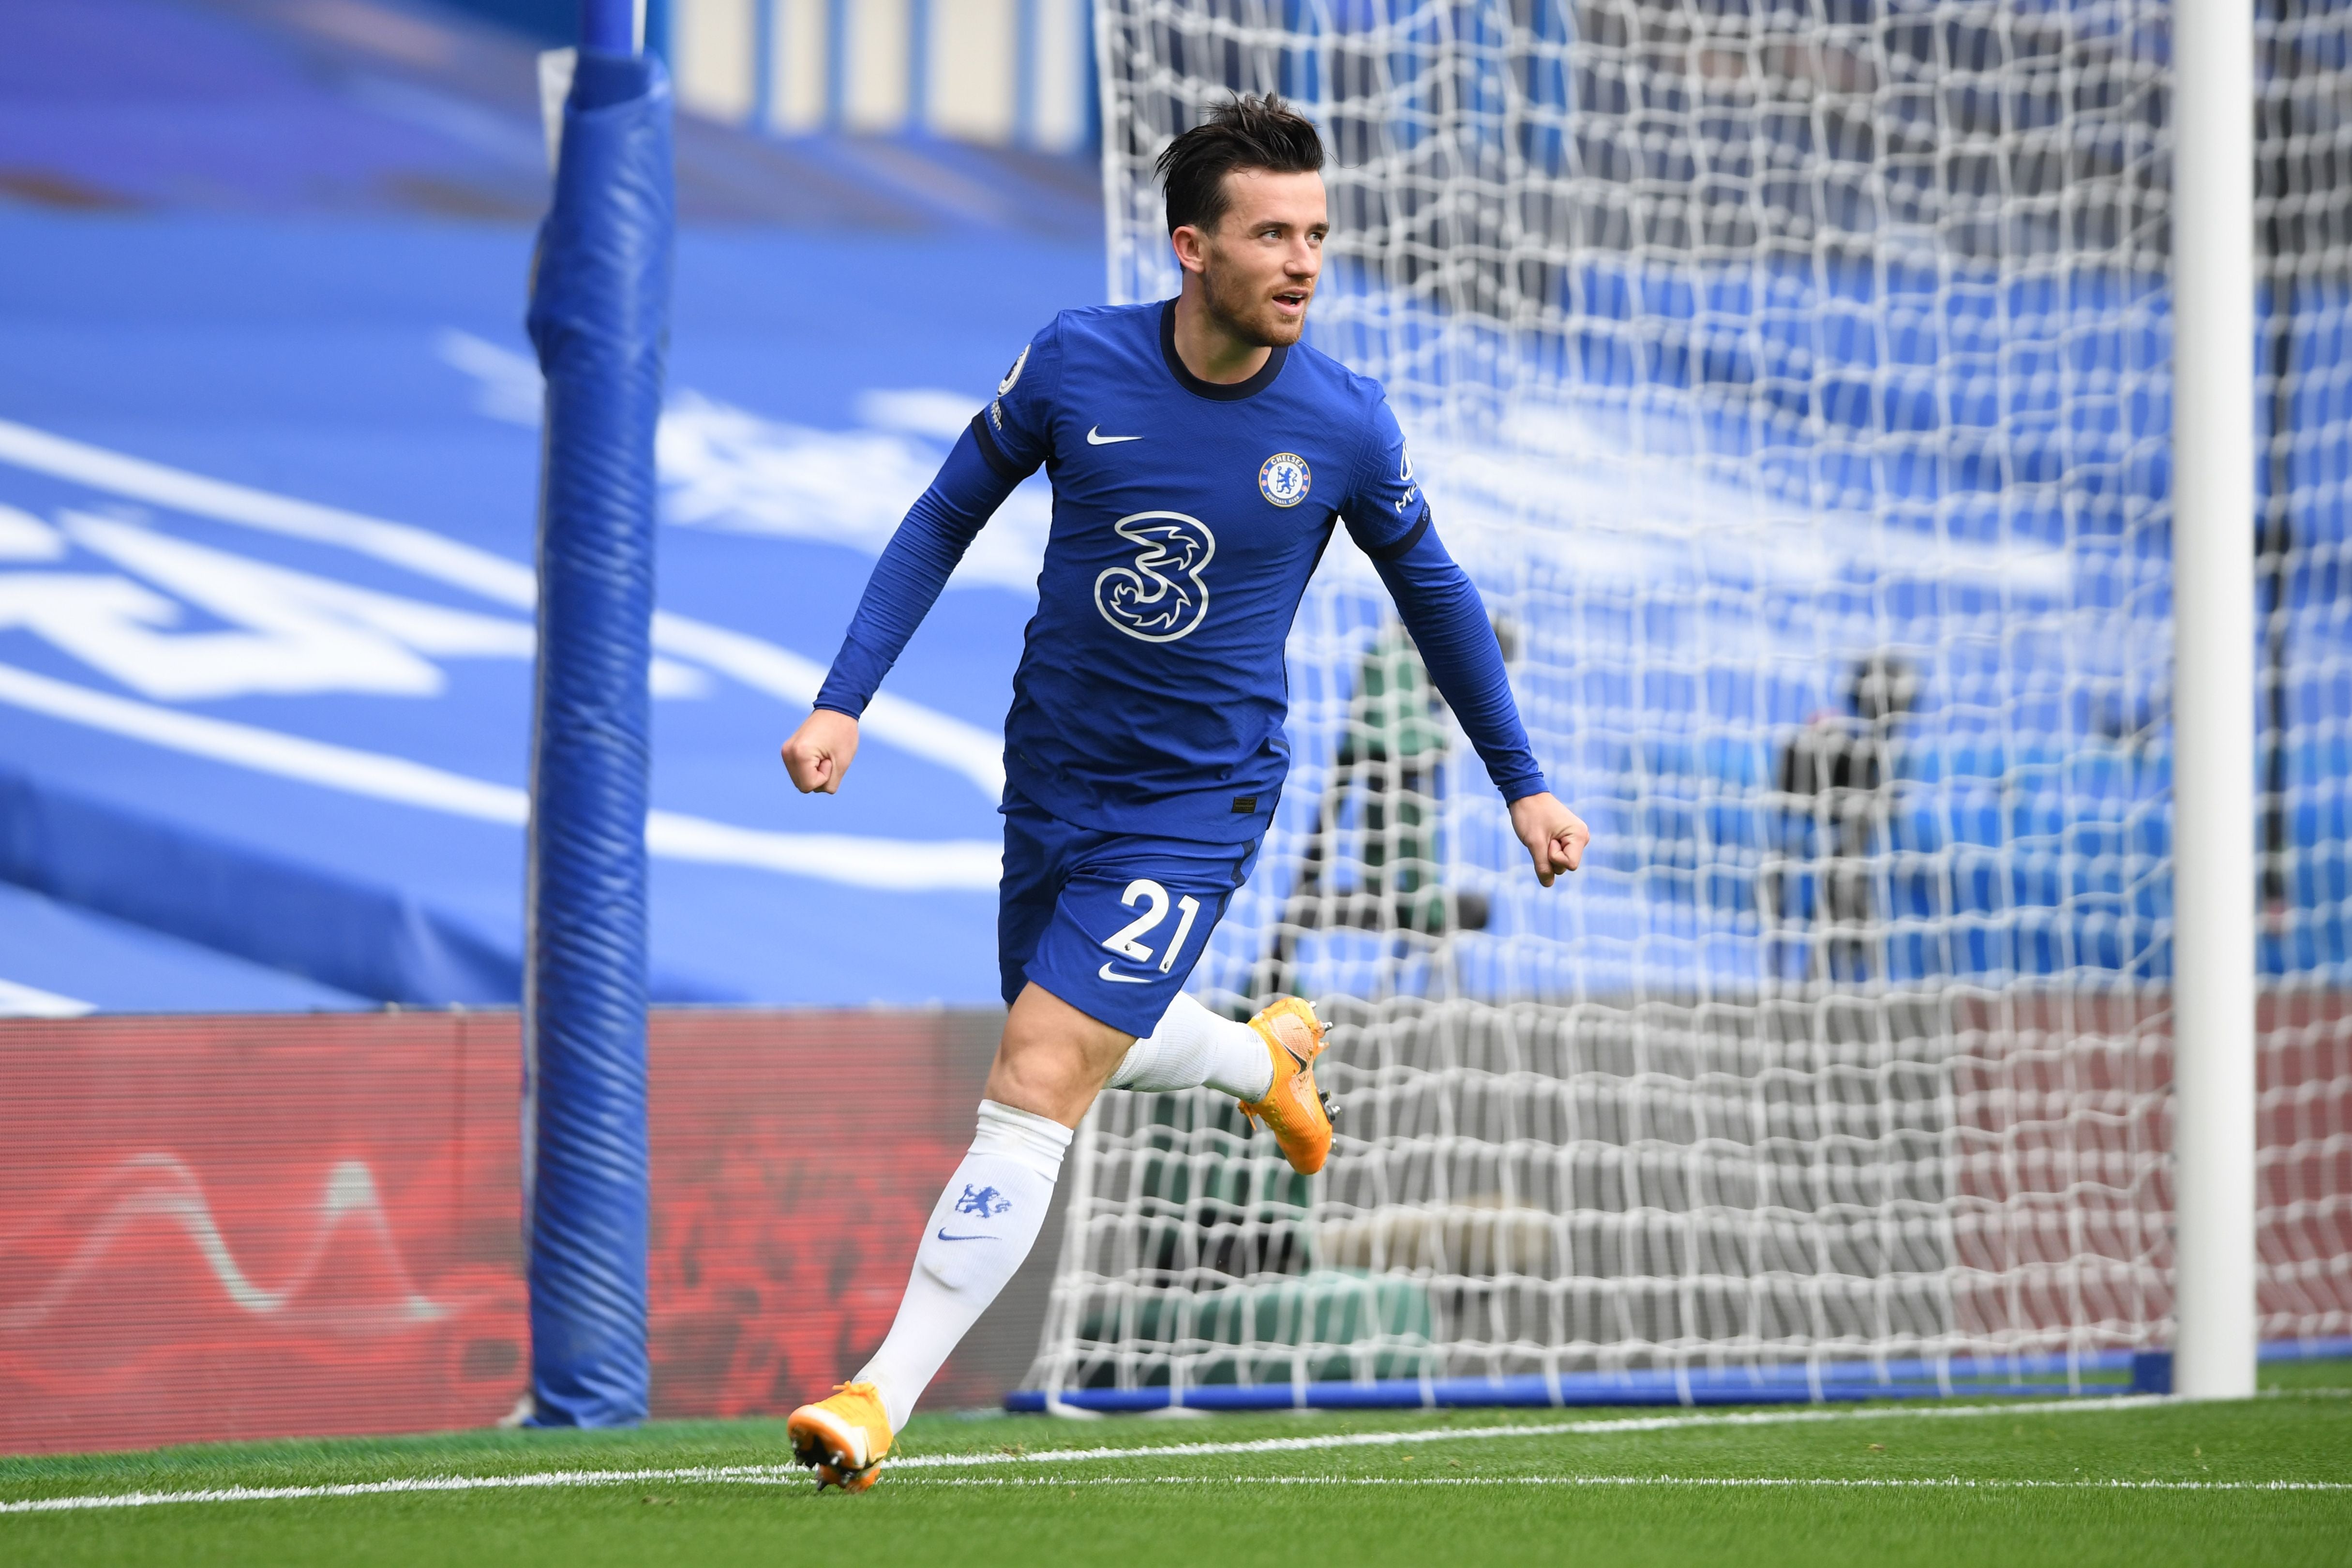 Ben Chilwell celebrates scoring his first goal for Chelsea